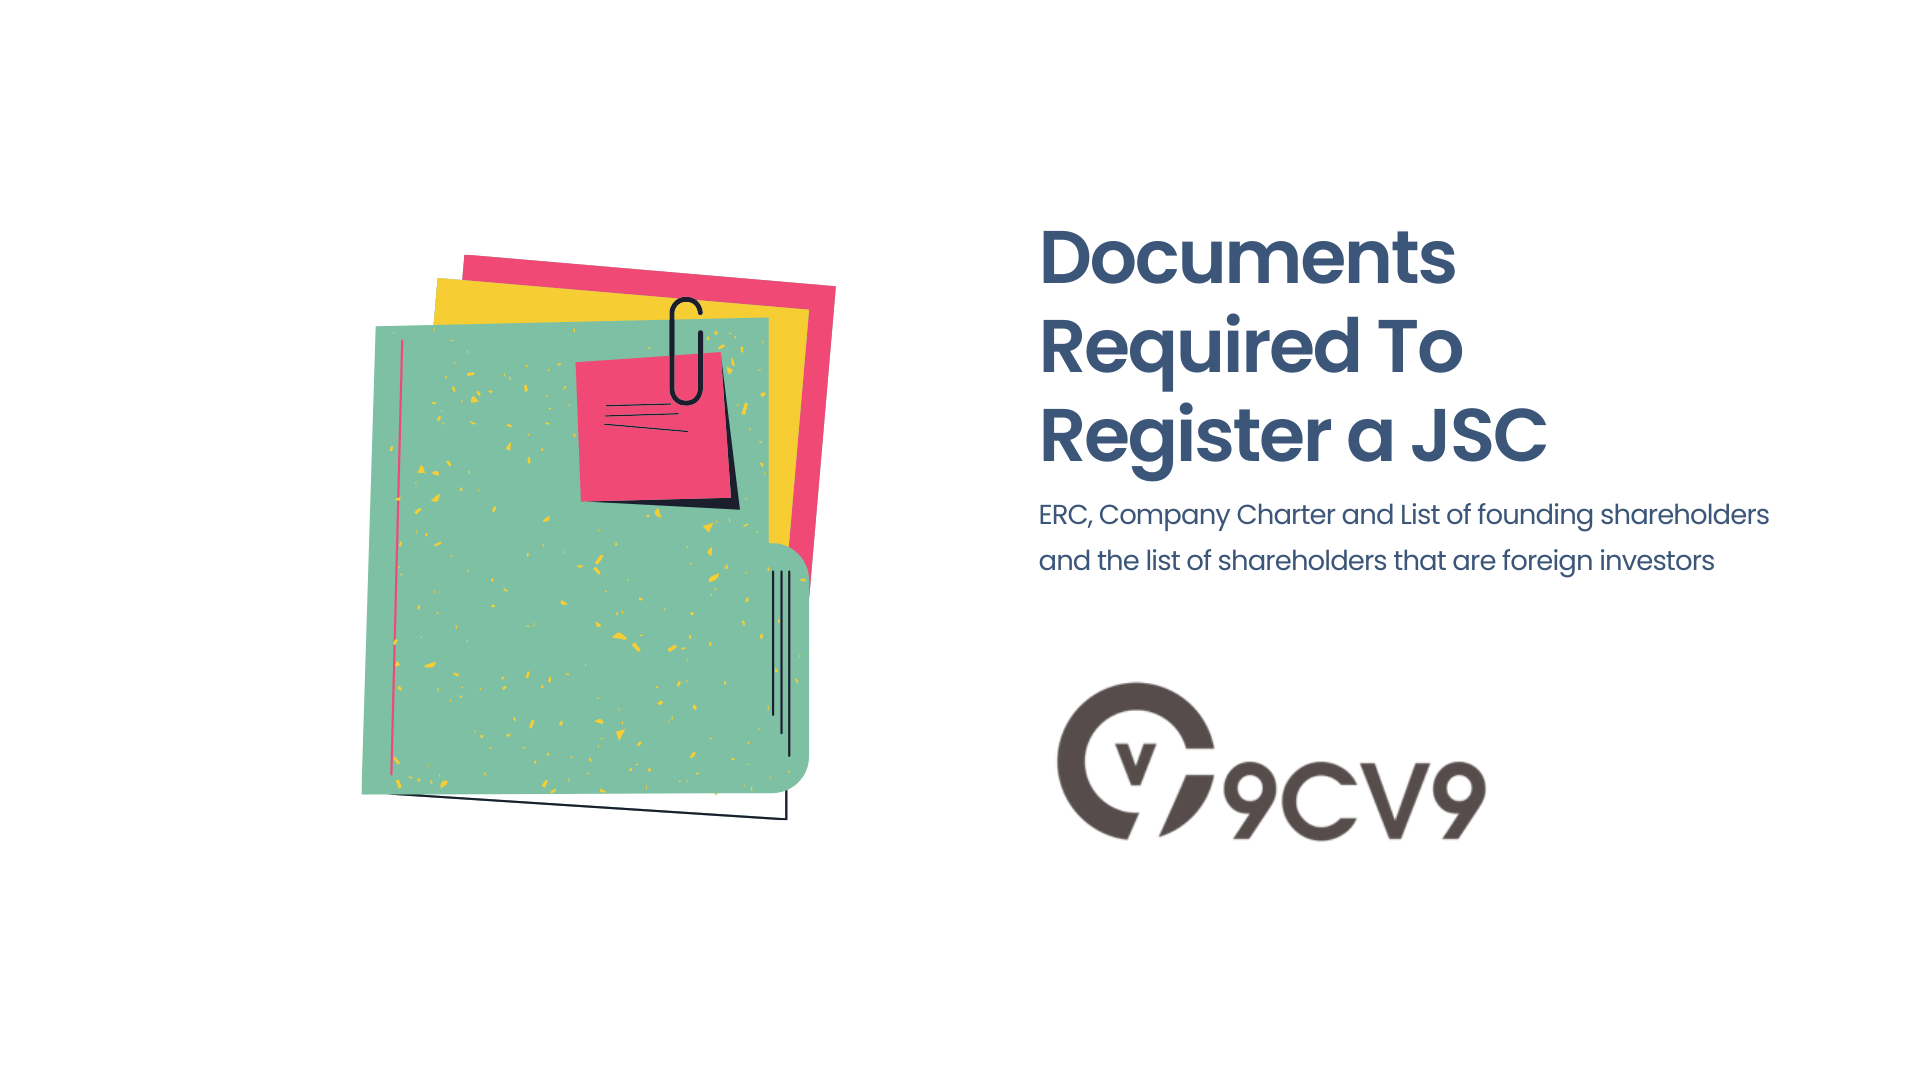 Documents Required To Register a JSC